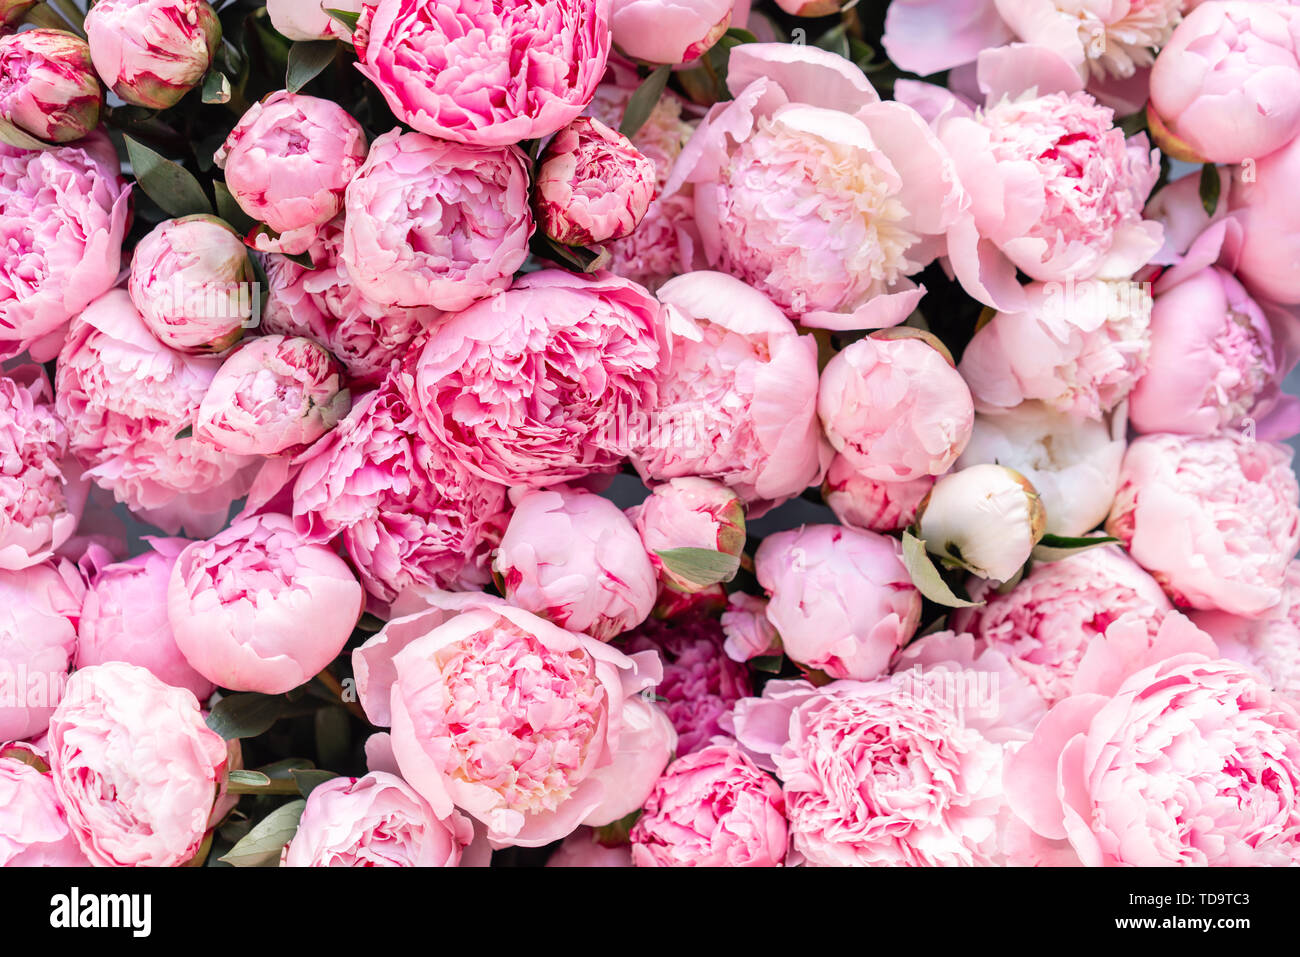 Floral Carpet Or Wallpaper Background Of Pink Peonies Morning Light In The Room Beautiful Peony Flower For Catalog Or Online Store Floral Shop And Stock Photo Alamy